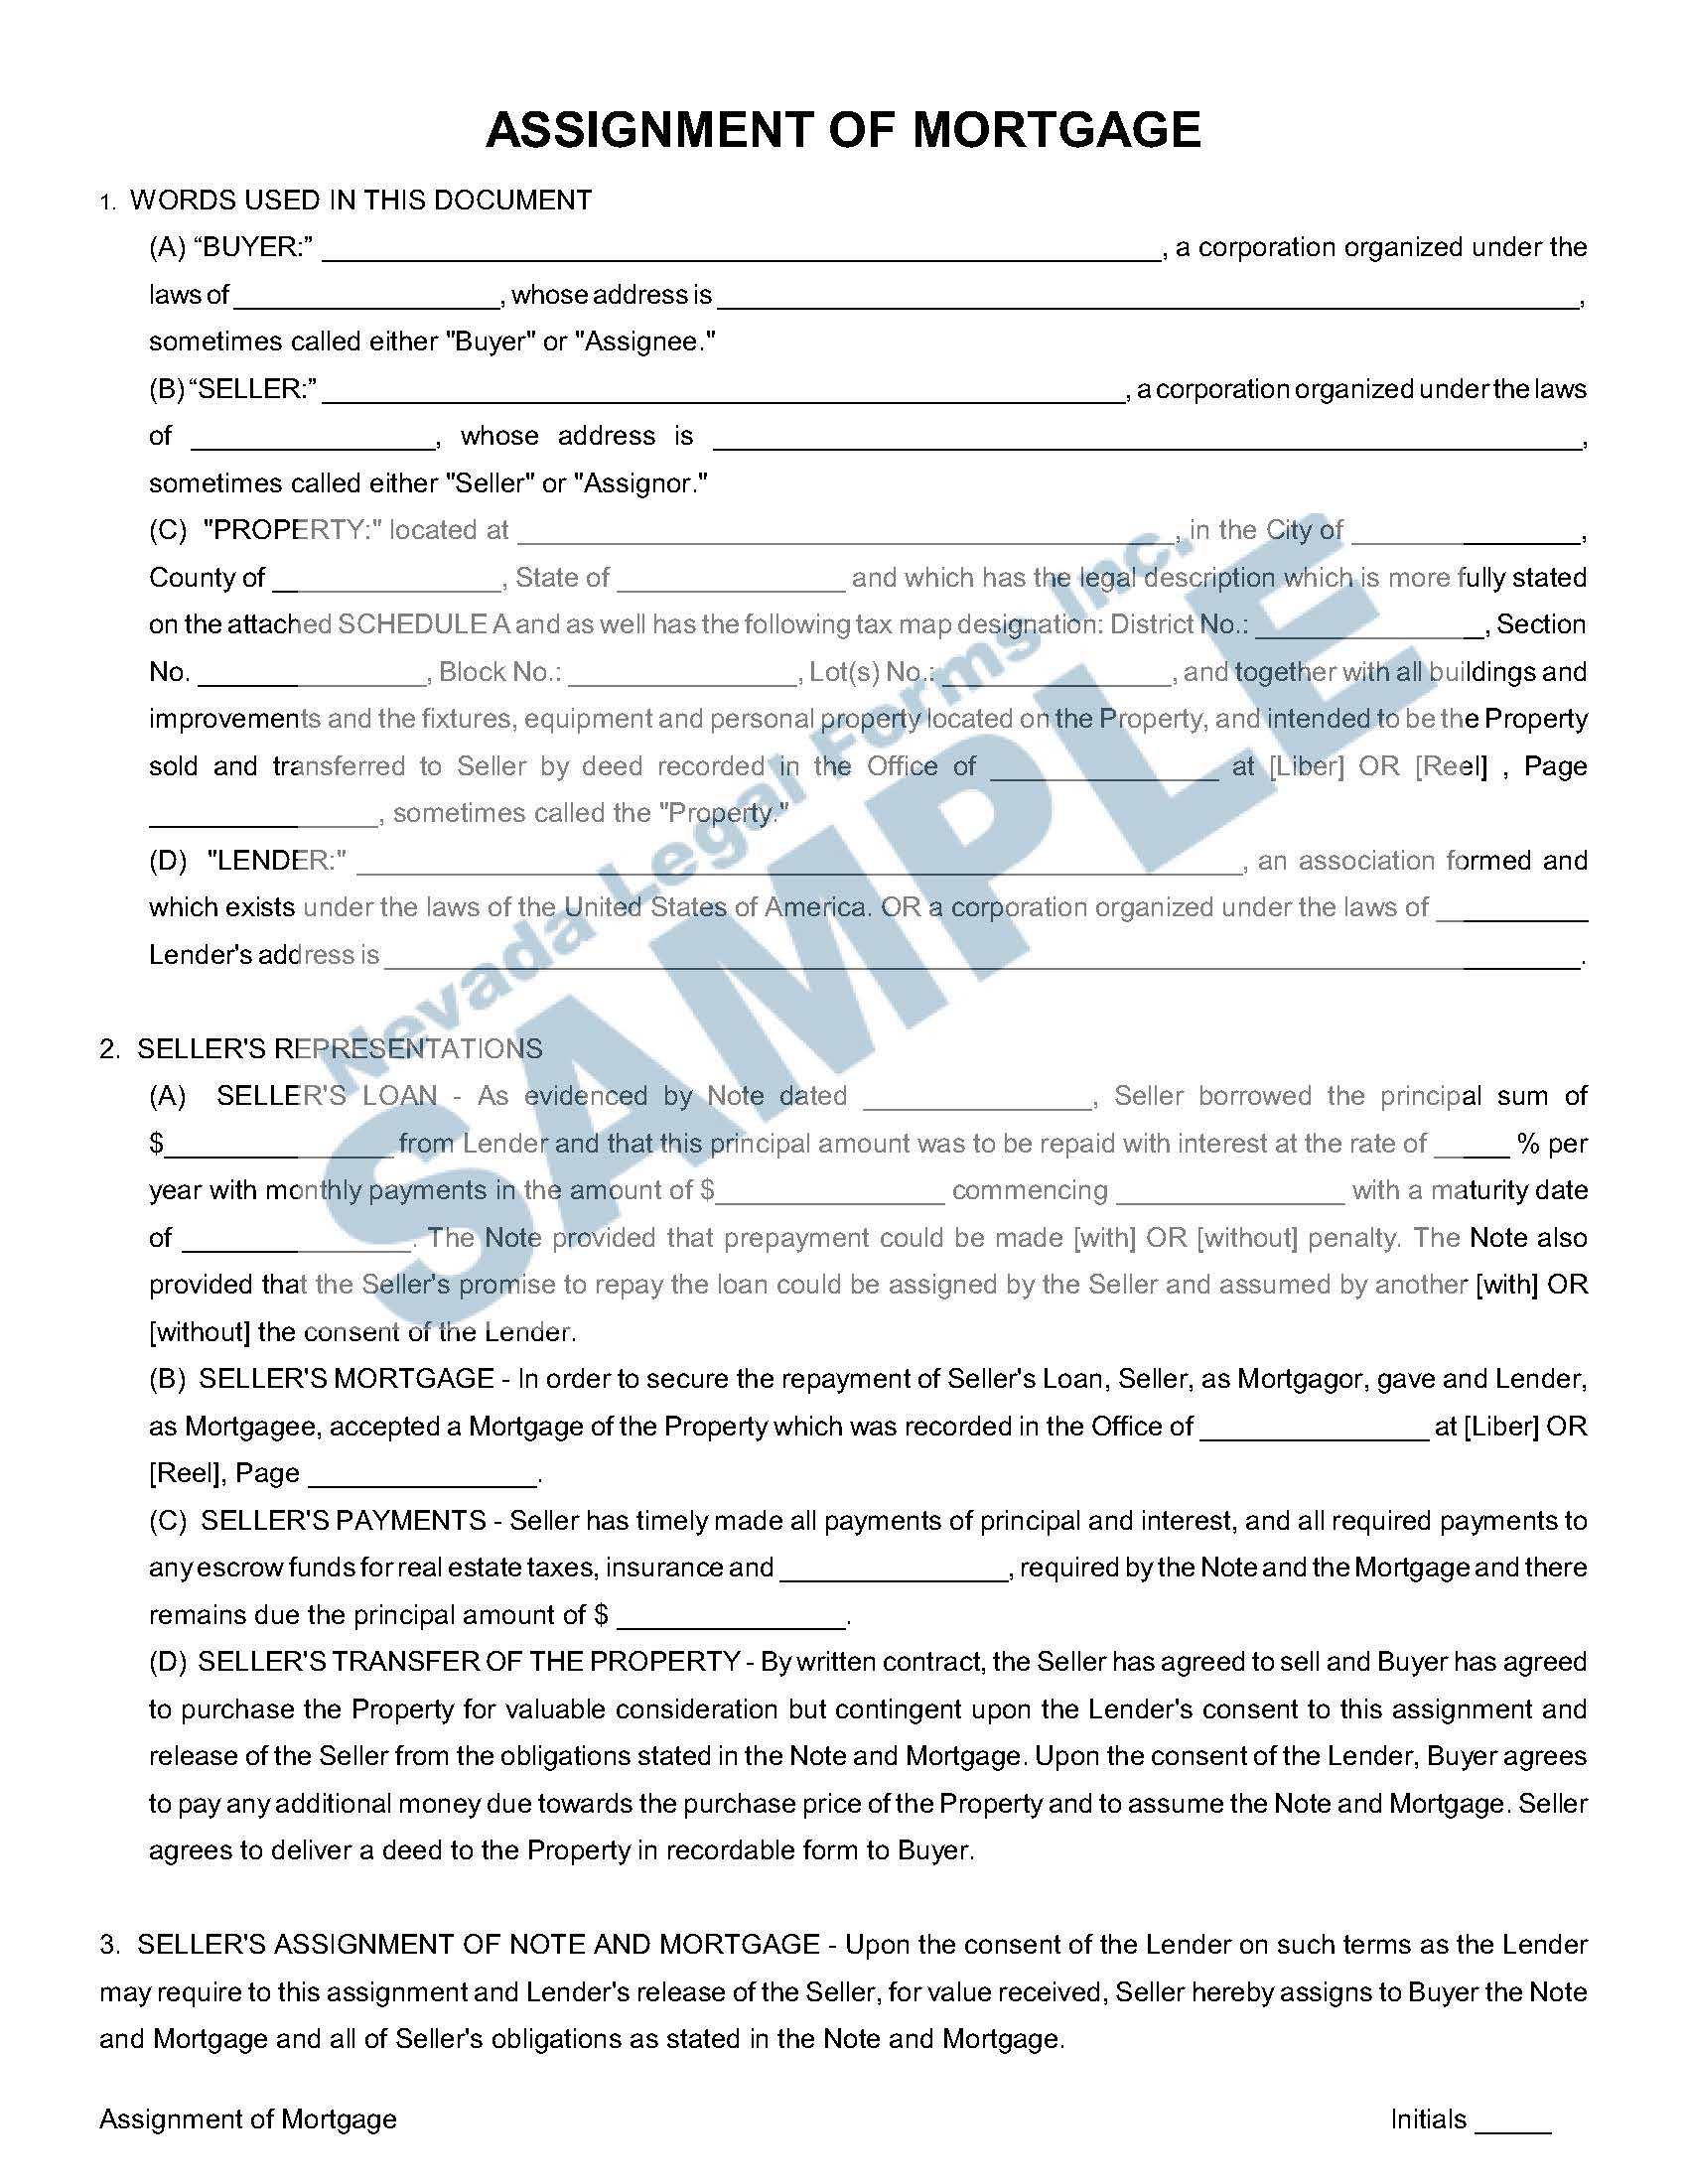 legal document assignment of mortgage